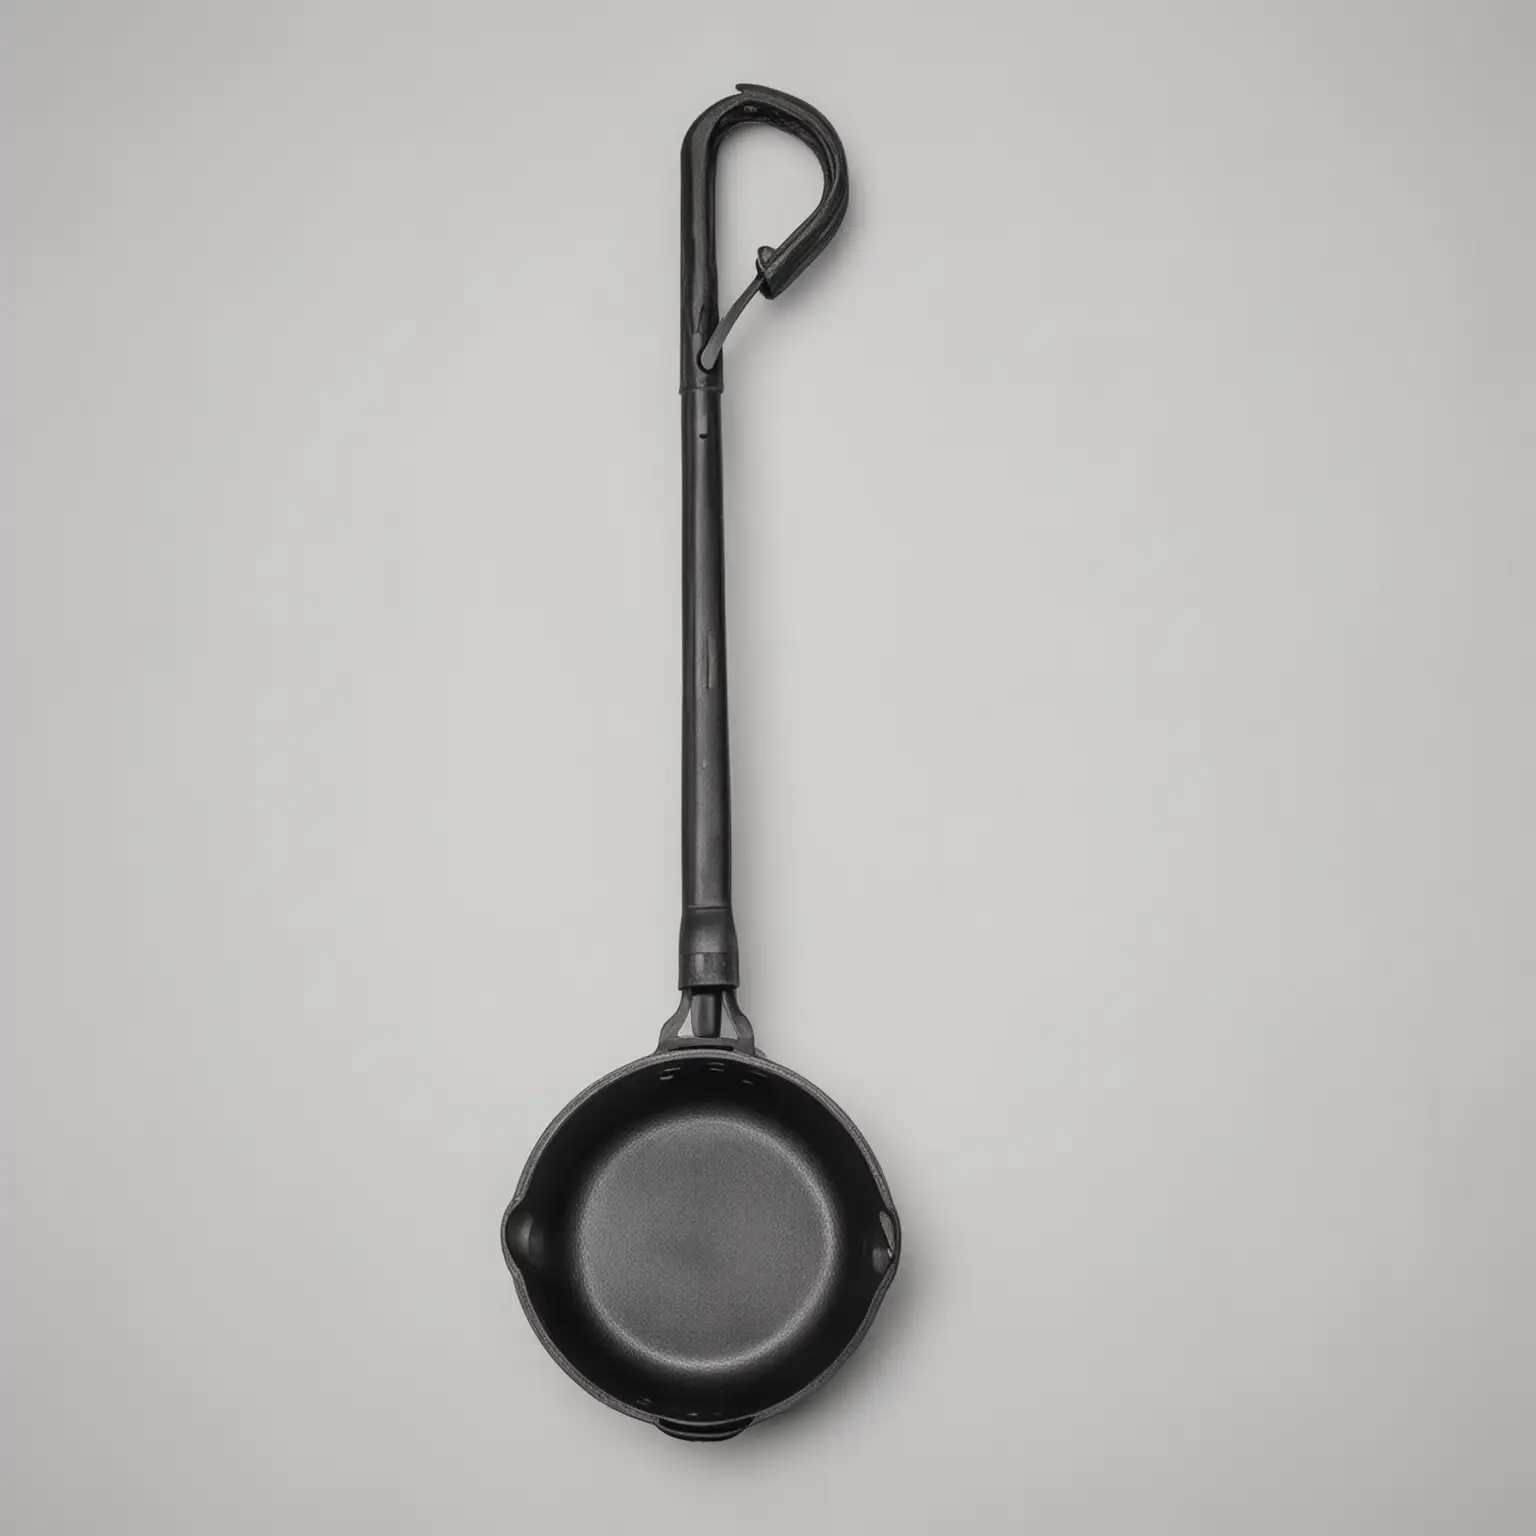 High-Quality-Black-Long-Handle-Skillet-on-White-Background